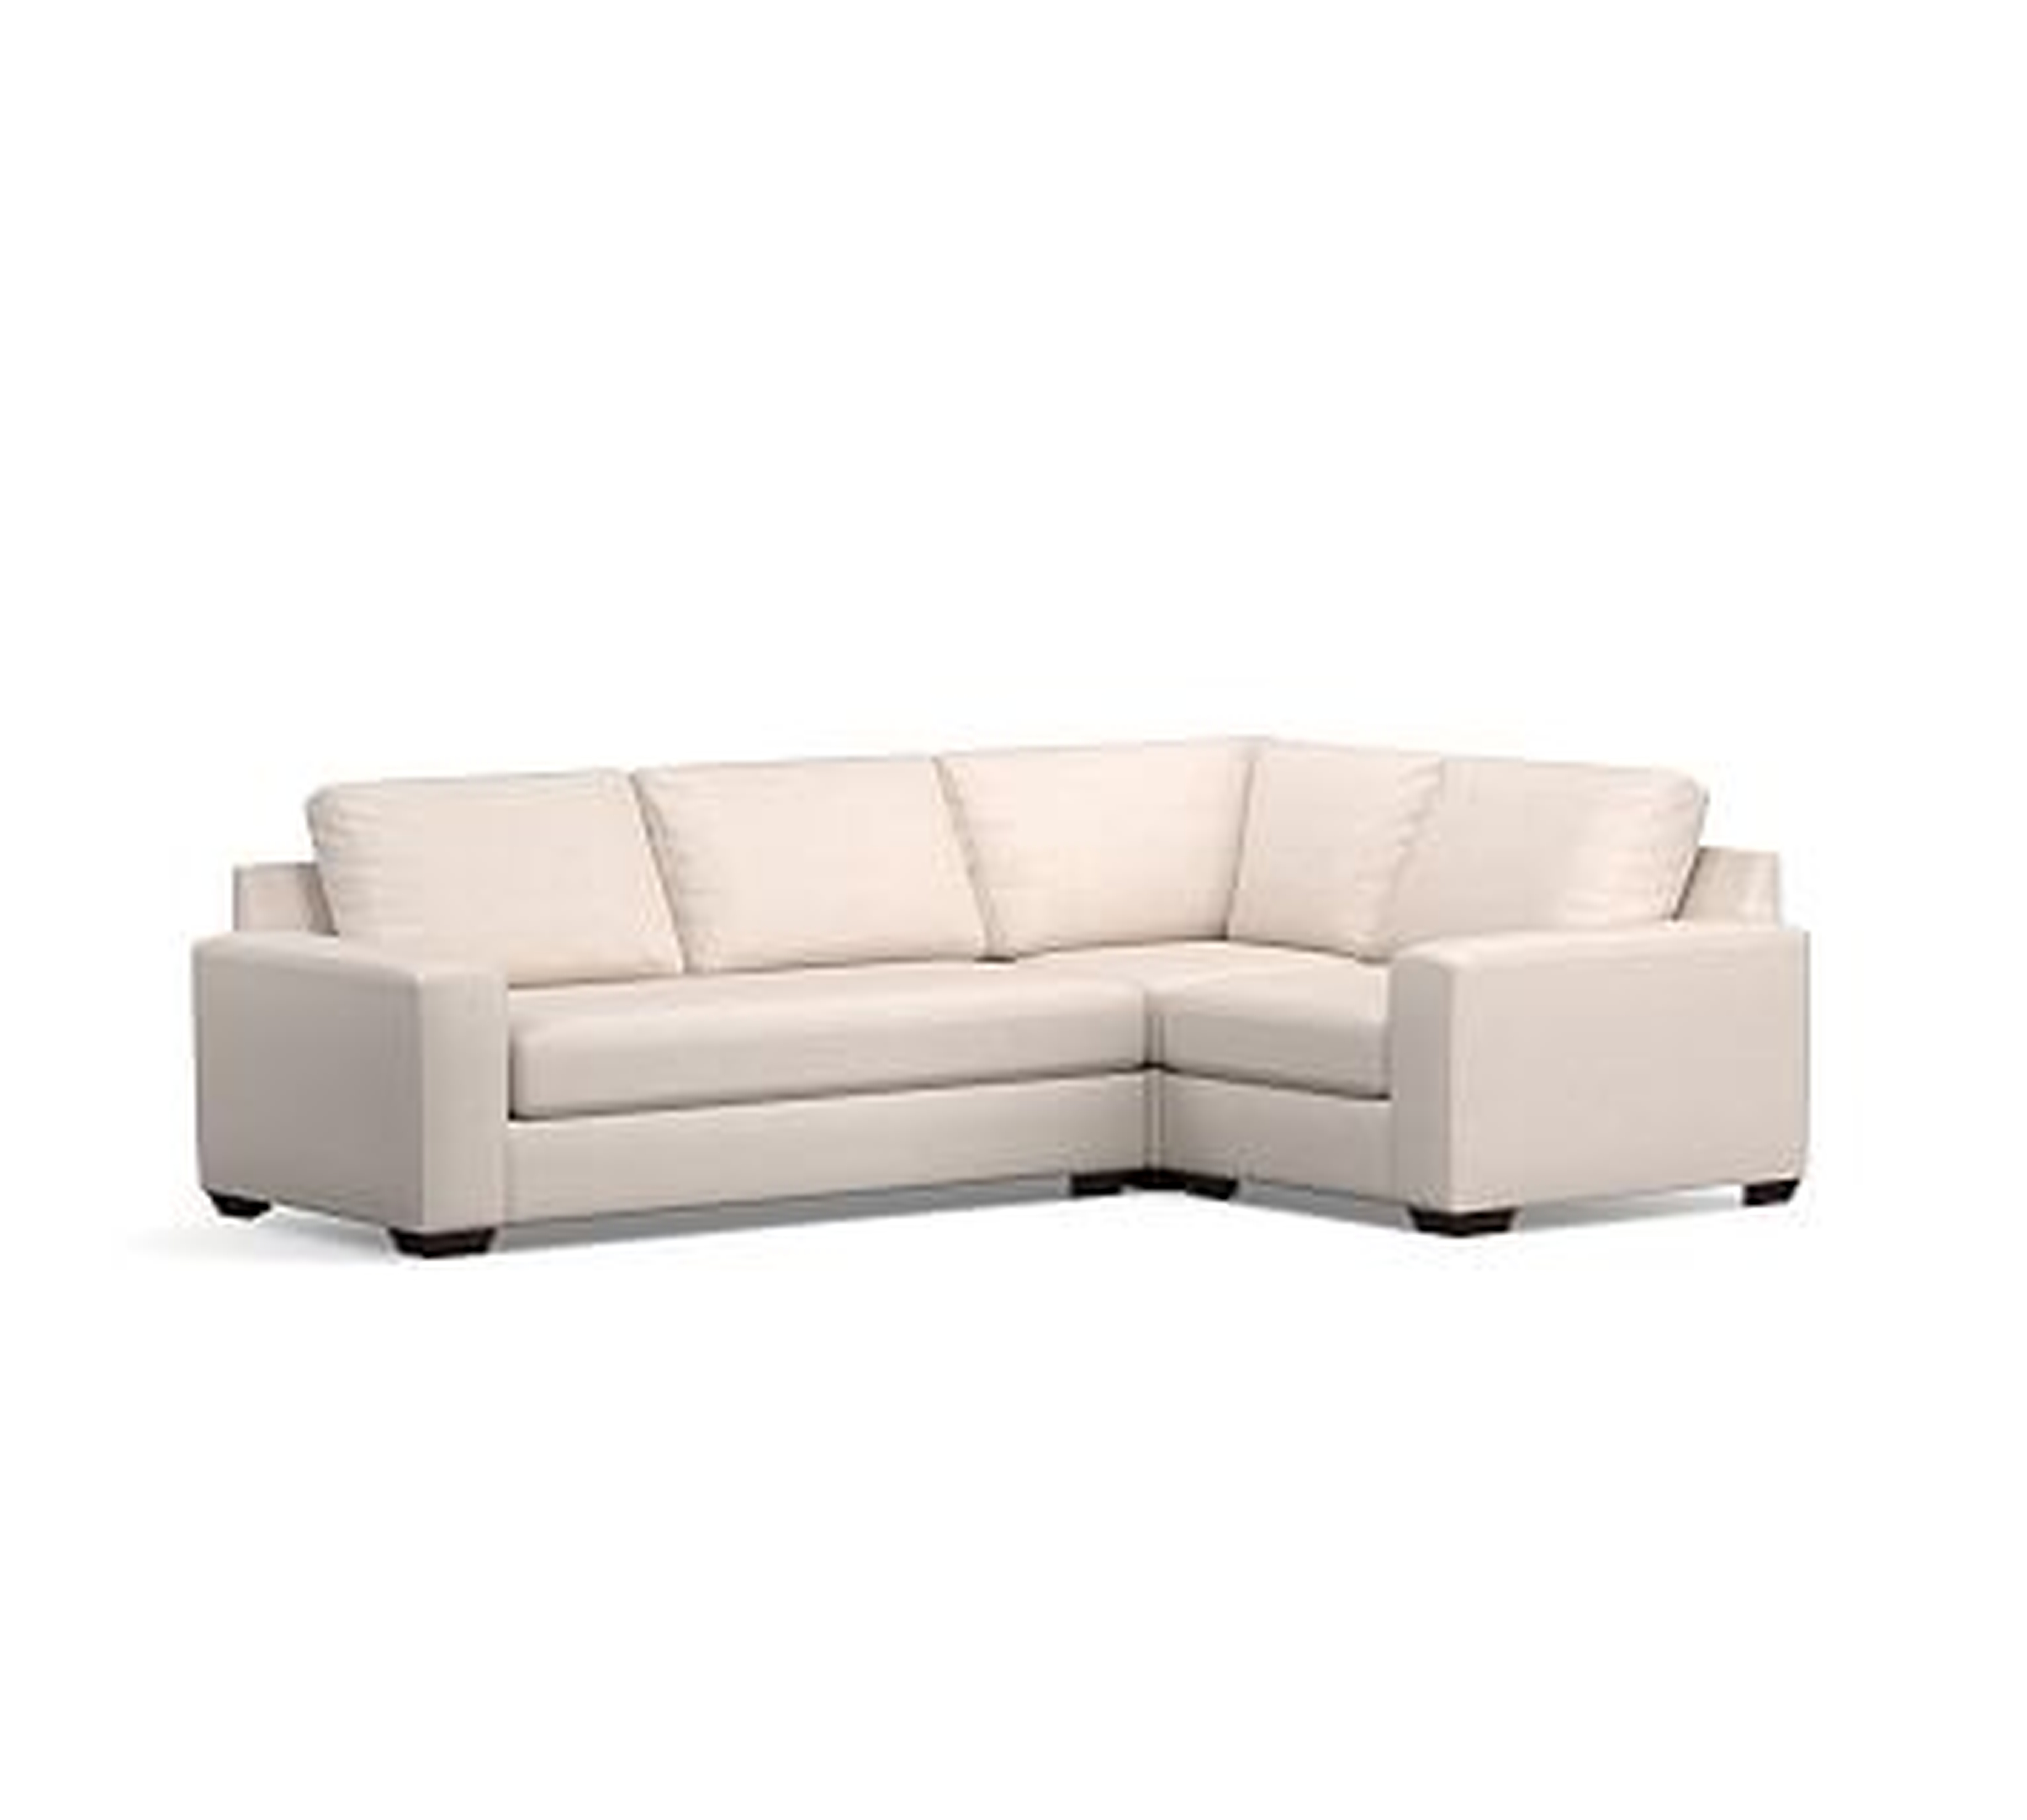 Big Sur Square Arm Upholstered Left Arm 3-Piece Corner Sectional with Bench Cushion, Down Blend Wrapped Cushions, Premium Performance Basketweave Ivory - Pottery Barn